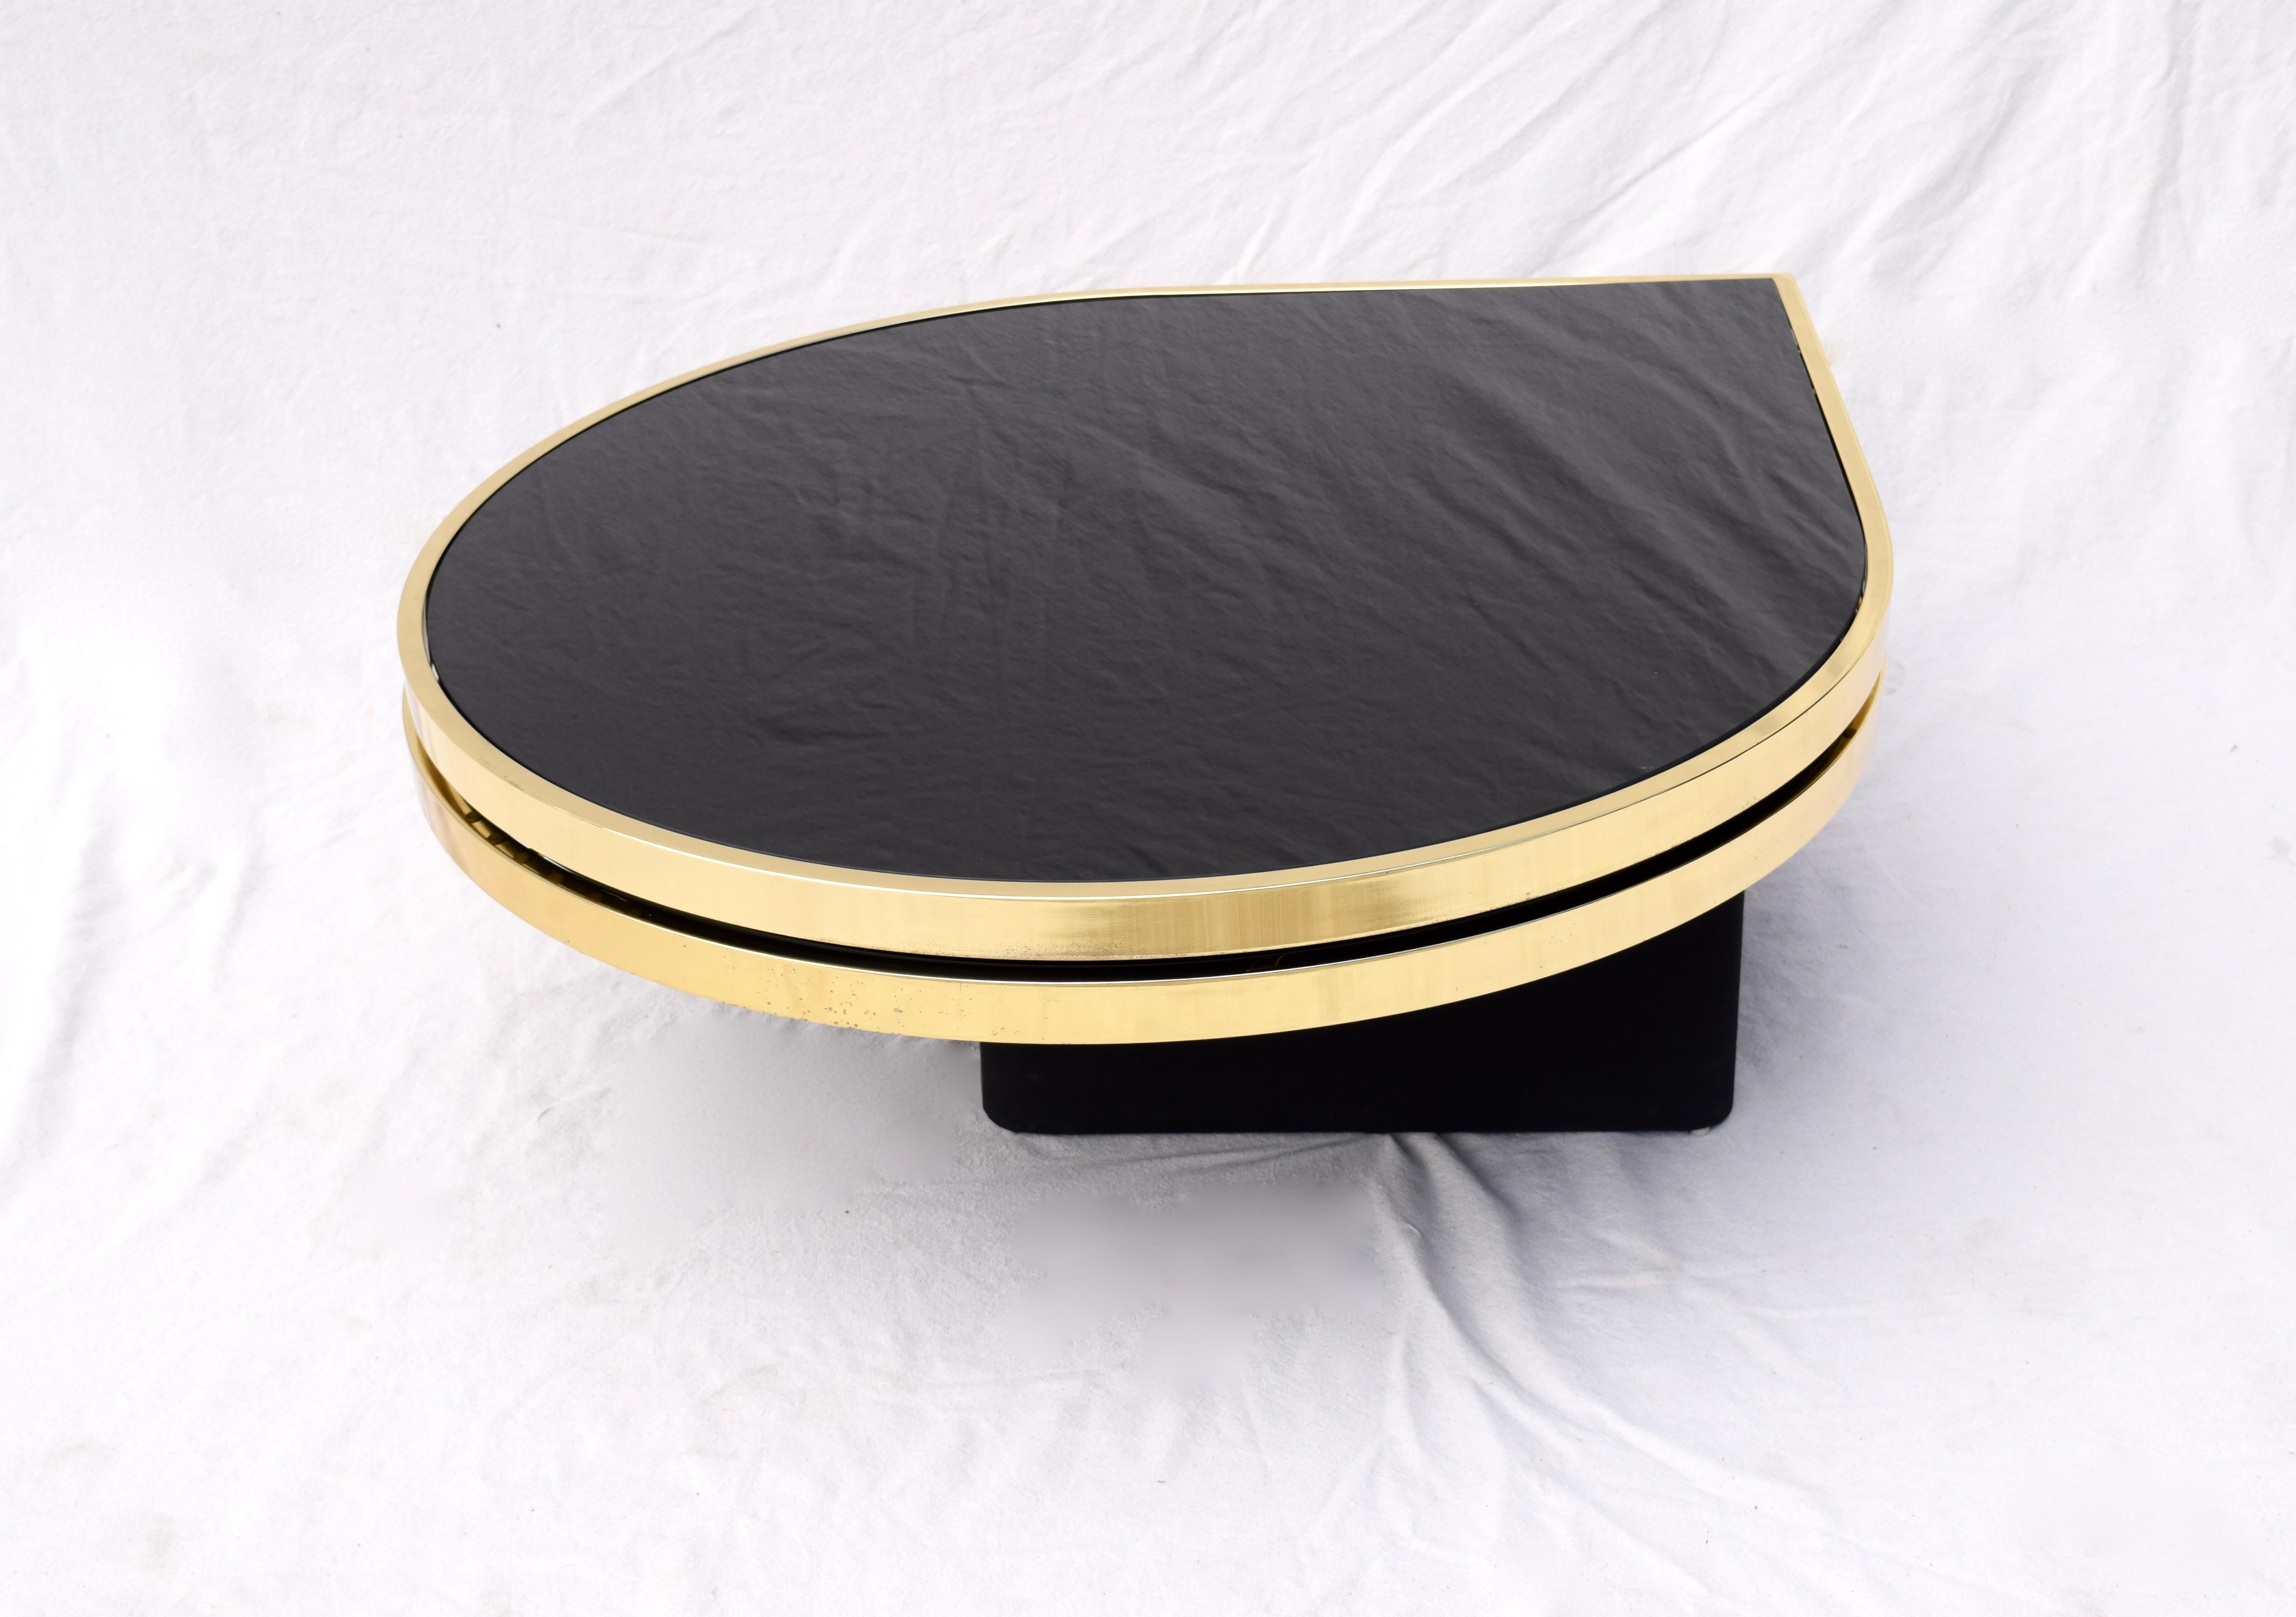 Swivel Brass & Black Glass Cocktail Table by Design Institute of America 1